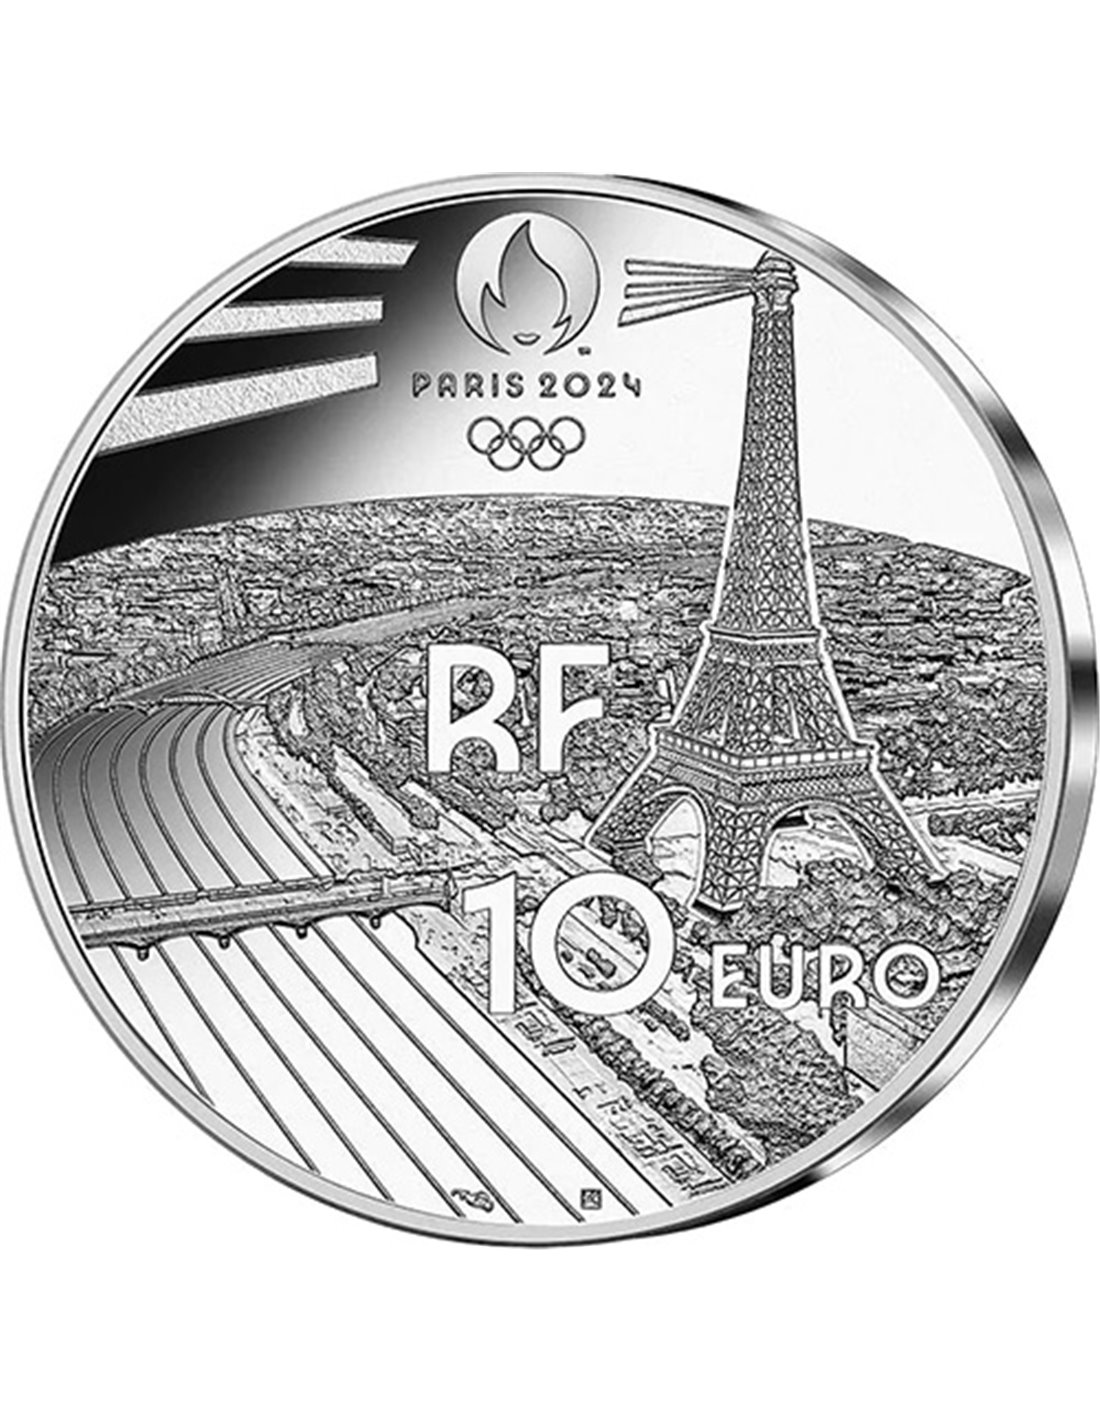 MASCOT Paris 2024 Olympic Games Silver Coin 10€ Euro France 2022